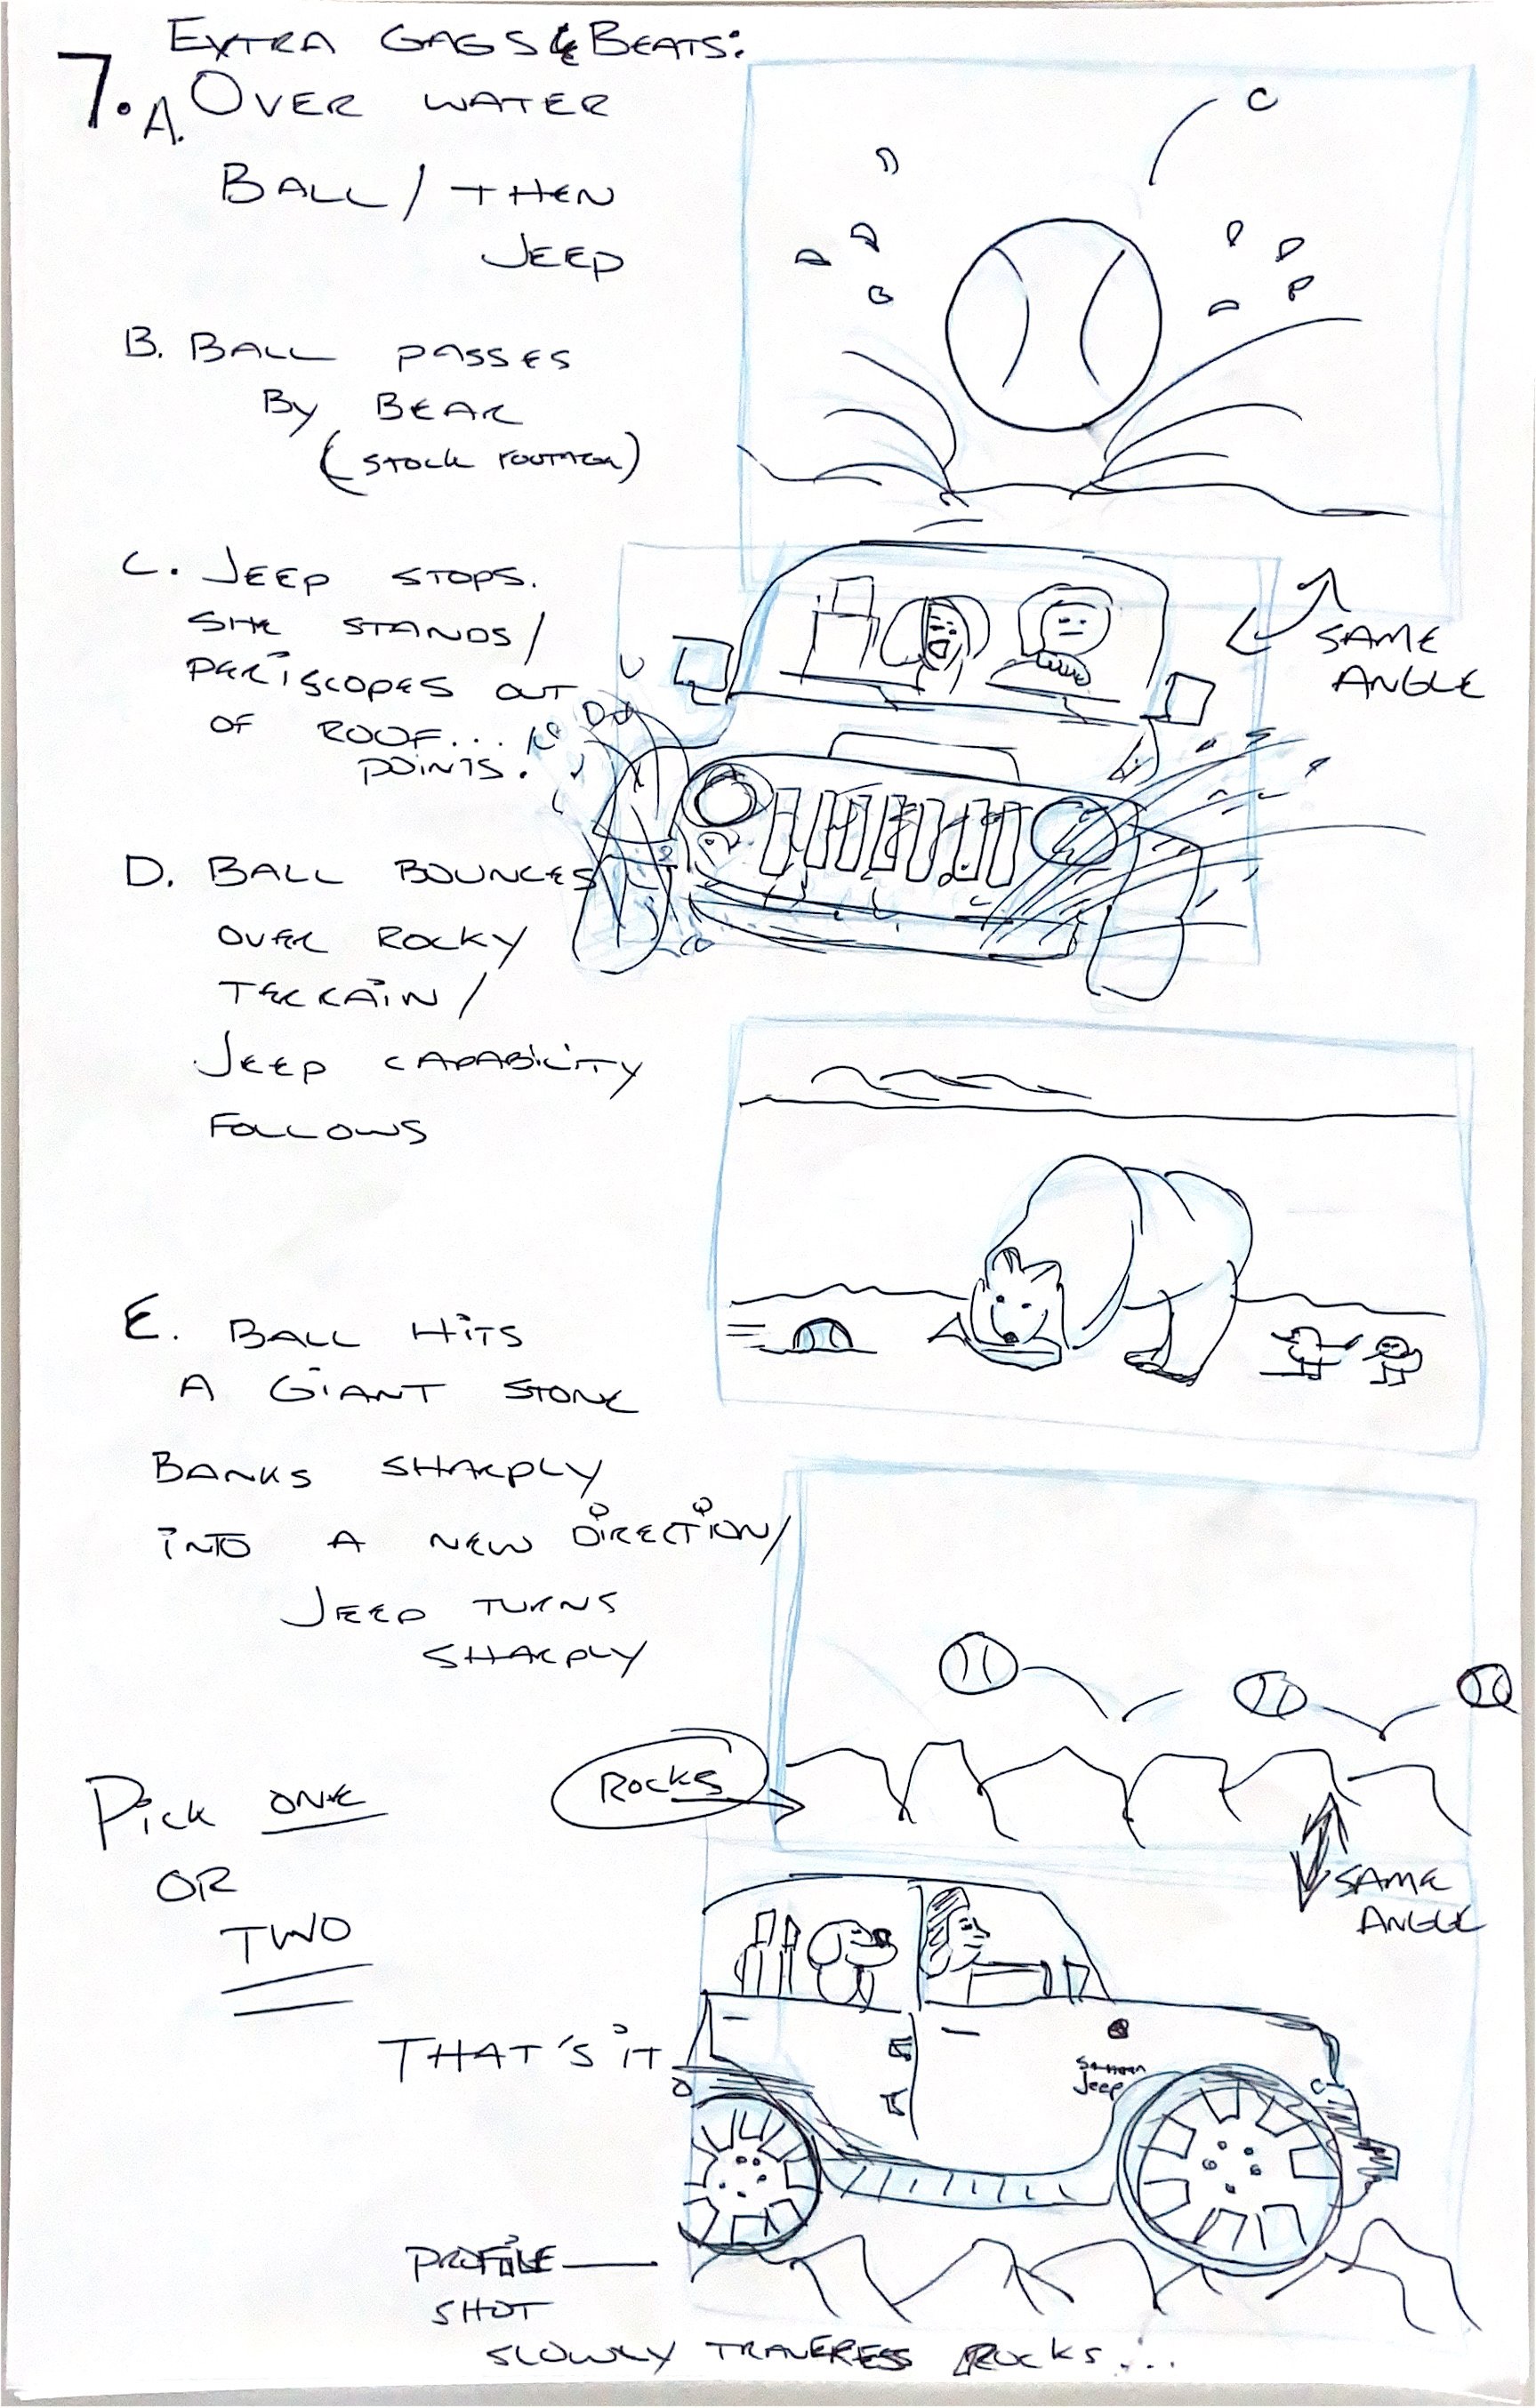 Jeep Fetch Storyboards_Page_3_Image_0001_Johnny Michael.jpg